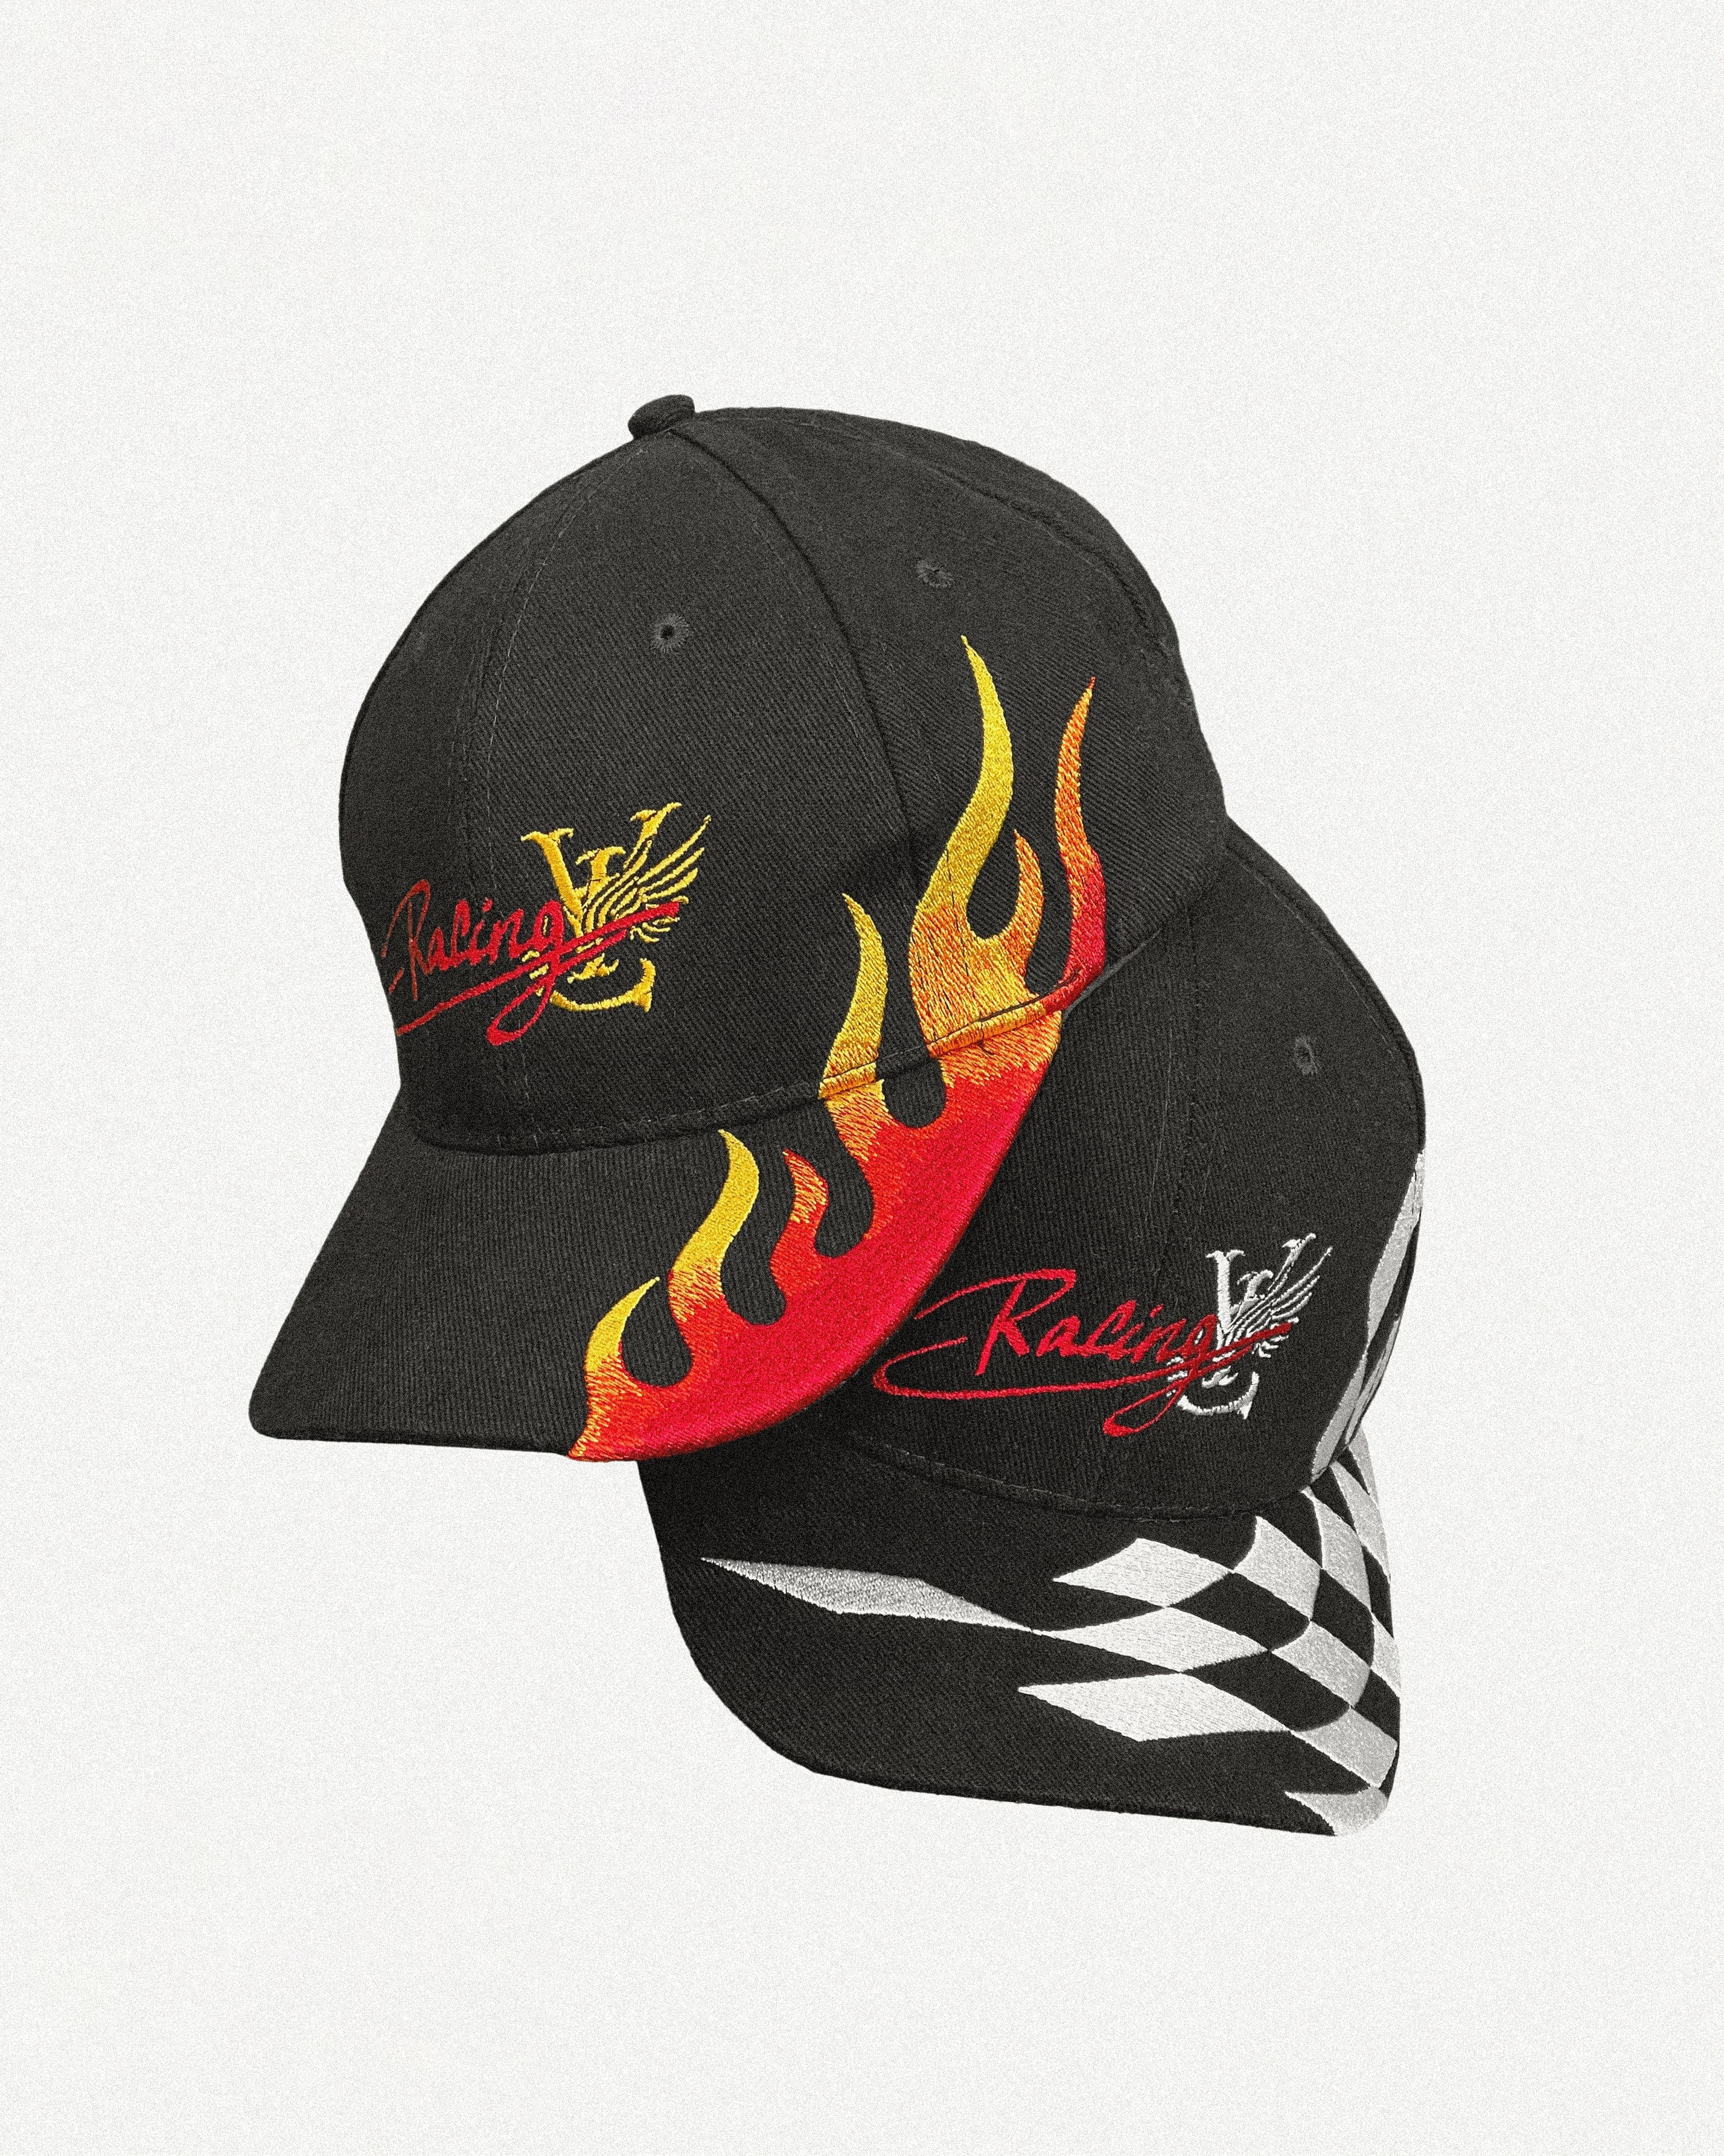 Flame and checks Y2K racing cap style. Vintage style headwear.